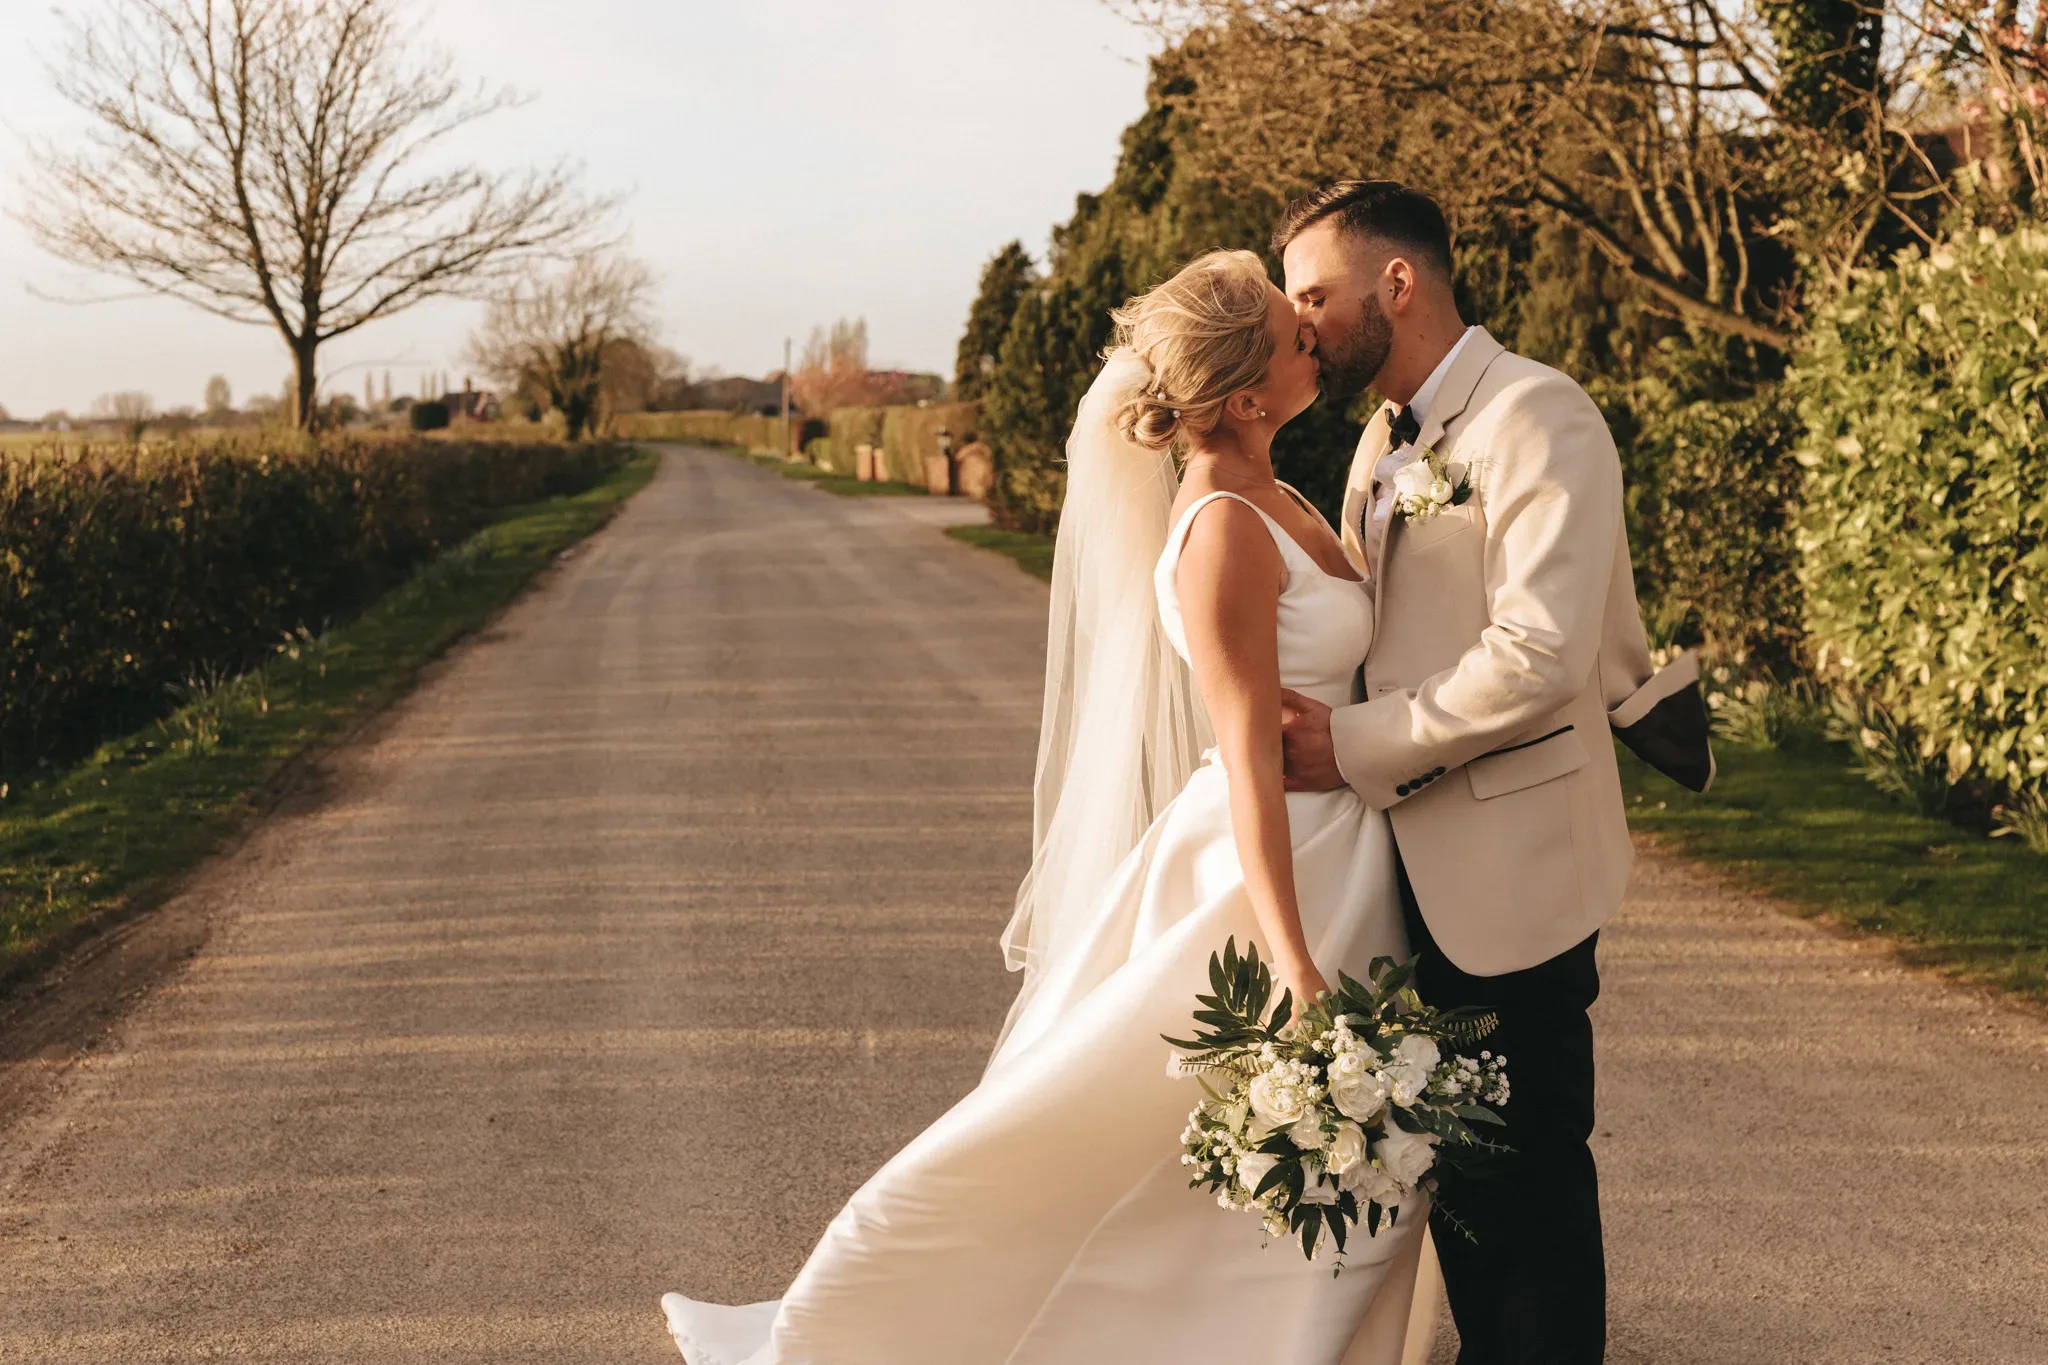 A newlywed couple shares a kiss on a country road. the bride, in a flowing white gown and holding a bouquet, and the groom, in a white suit, are bathed in sunlight with greenery and a clear sky around them.